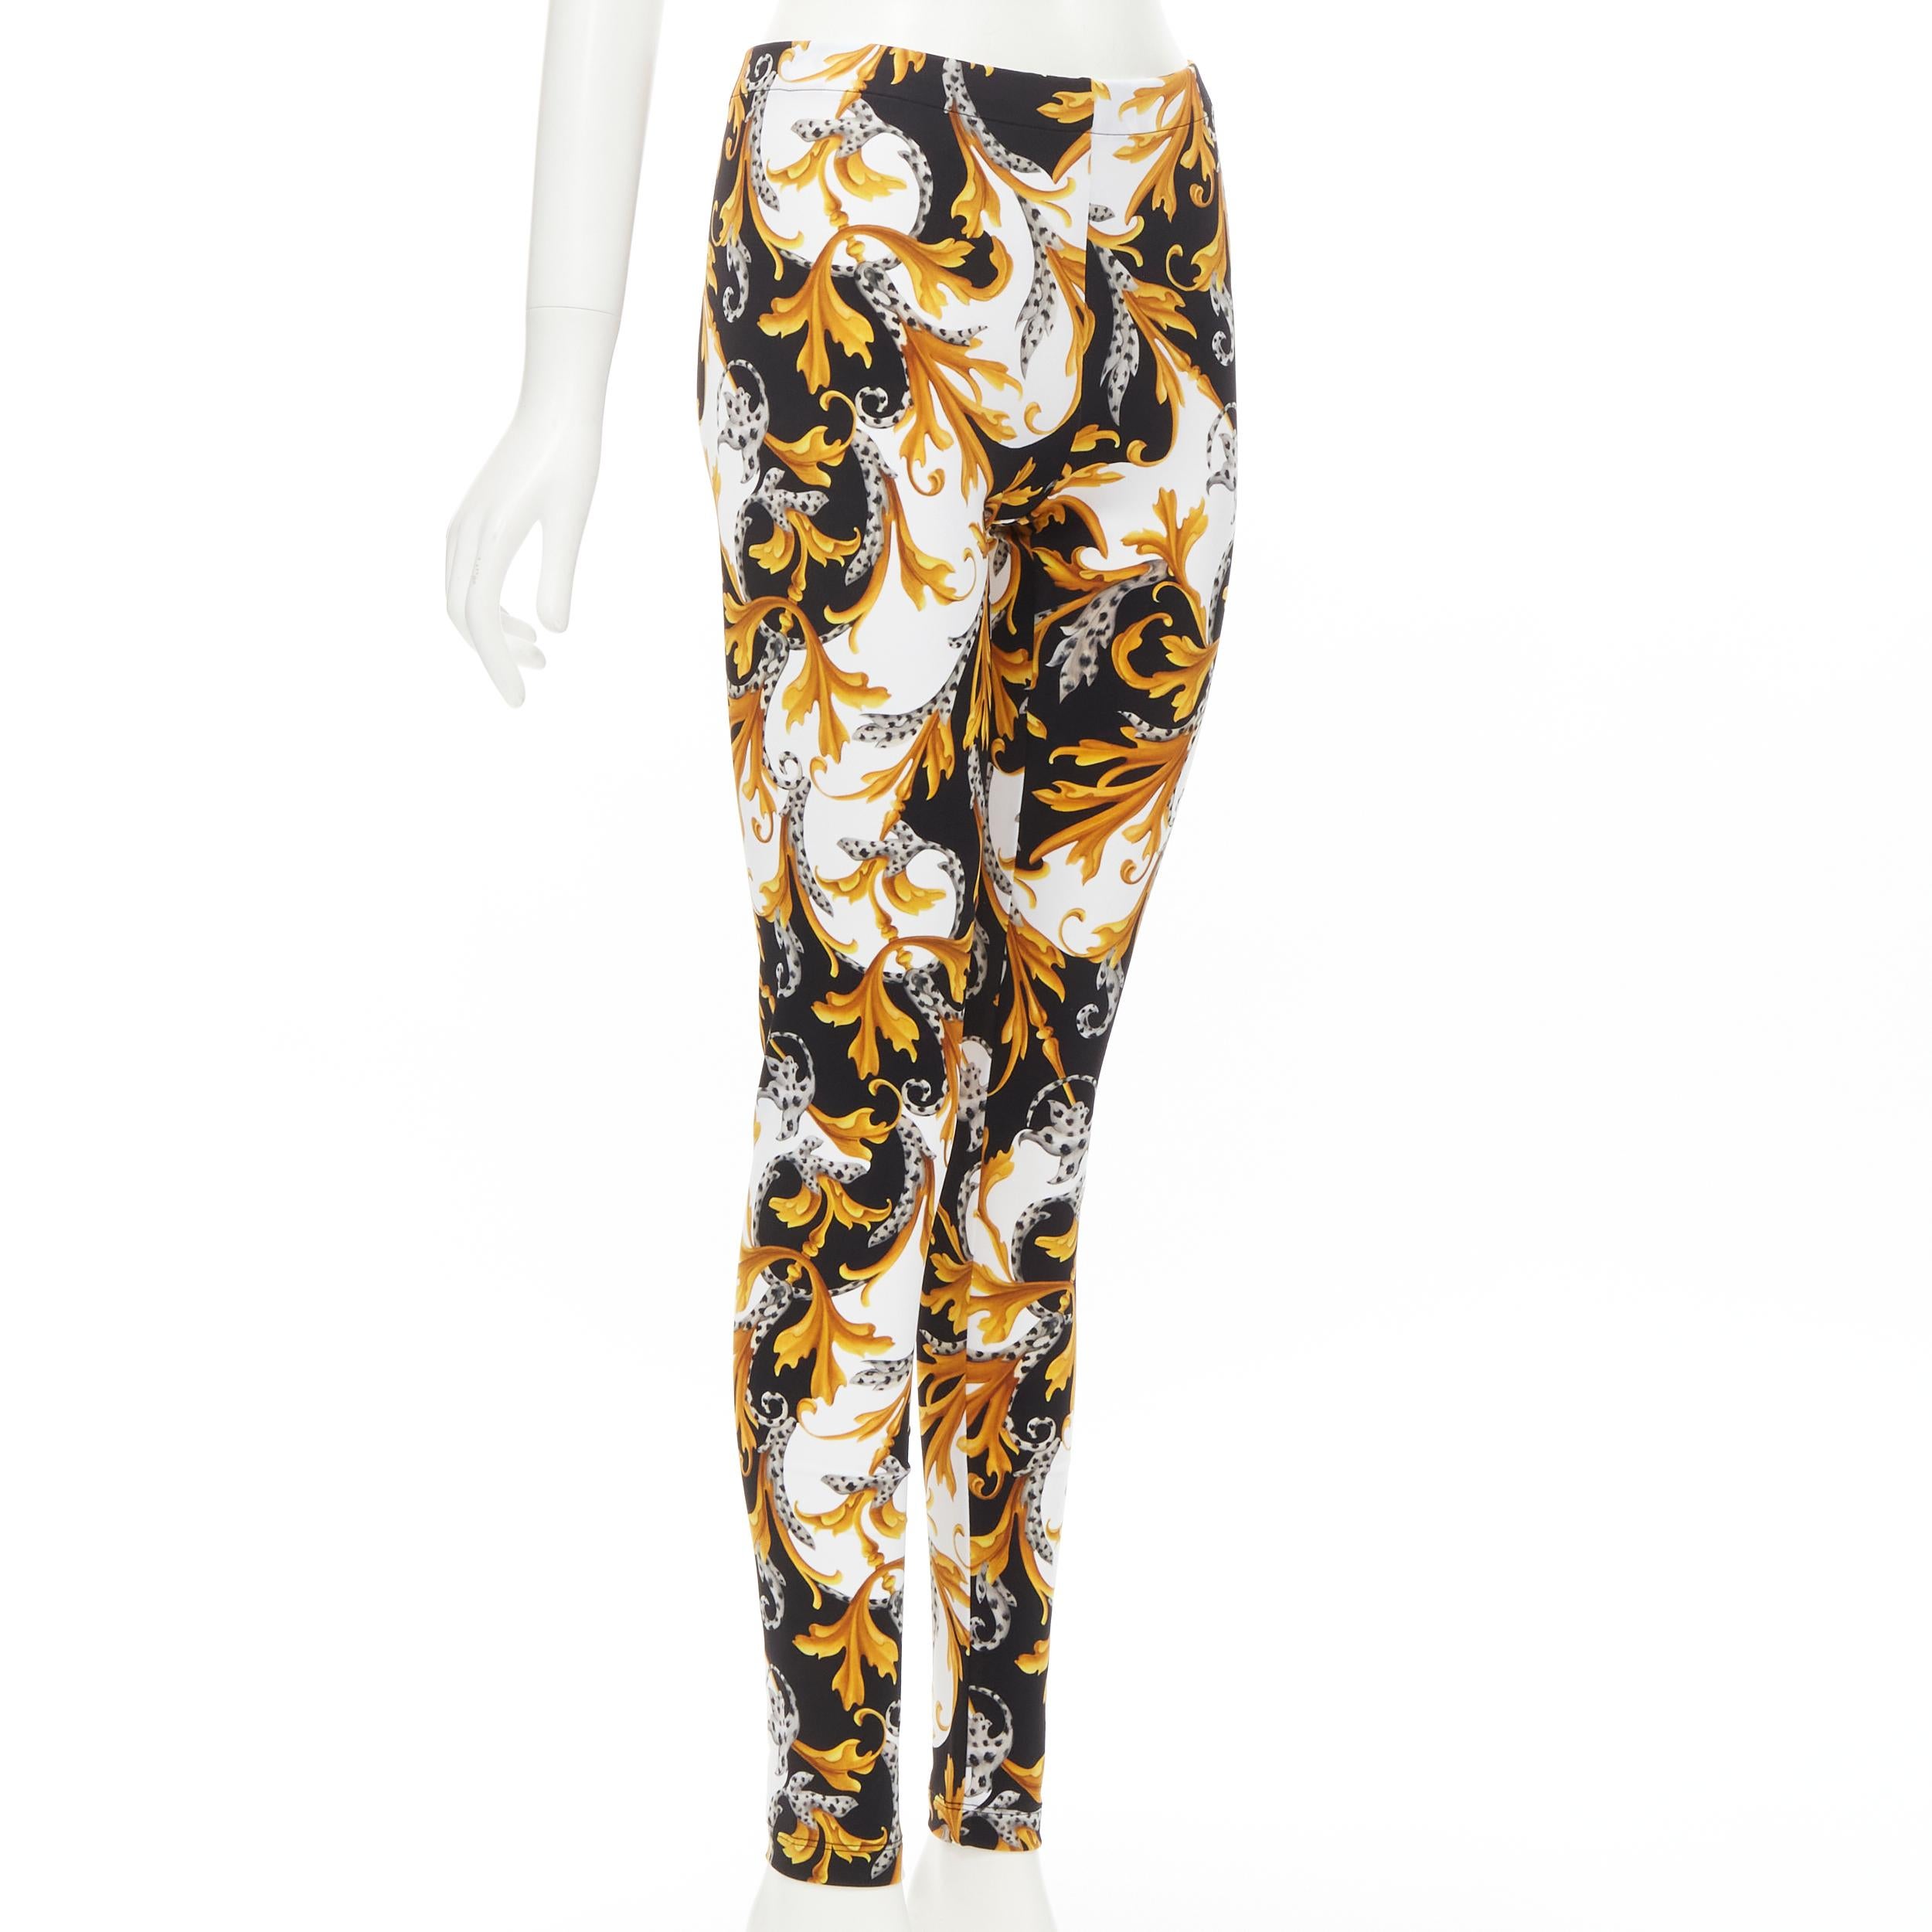 new VERSACE Barocco Acanthus black gold Signature floral legging pants IT44 L 
Reference: TGAS/C01061 
Brand: Versace 
Designer: Donatella Versace 
Collection: Barocco Acanthus 
Material: Polyamide 
Color: Gold 
Pattern: Floral 
Closure: Stretch